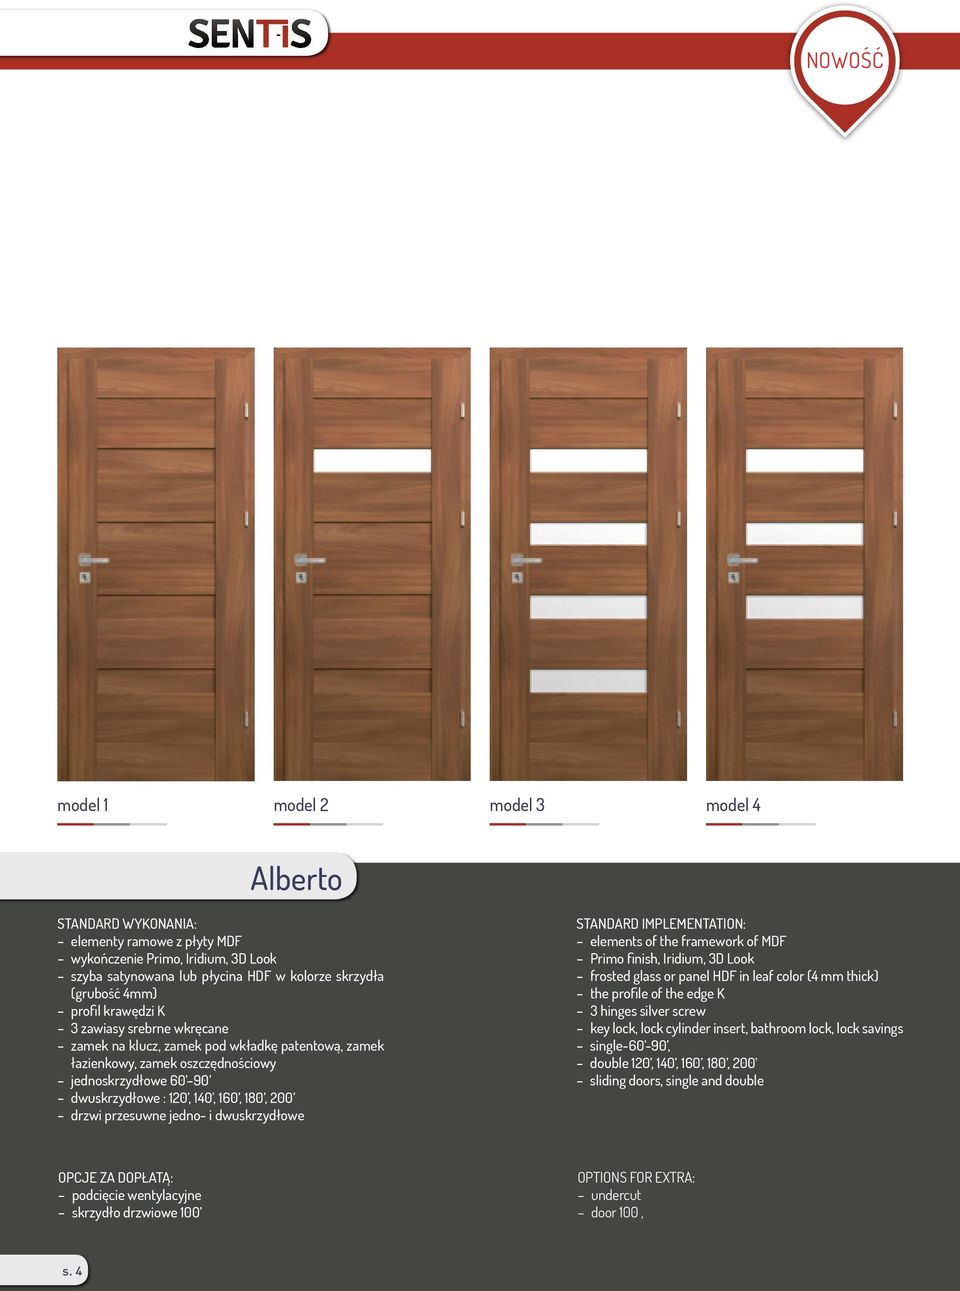 przesuwne jedno- i dwuskrzydłowe STANDARD IMPLEMENTATION: elements of the framework of MDF Primo finish, Iridium, 3D Look frosted glass or panel HDF in leaf color (4 mm thick) the profile of the edge